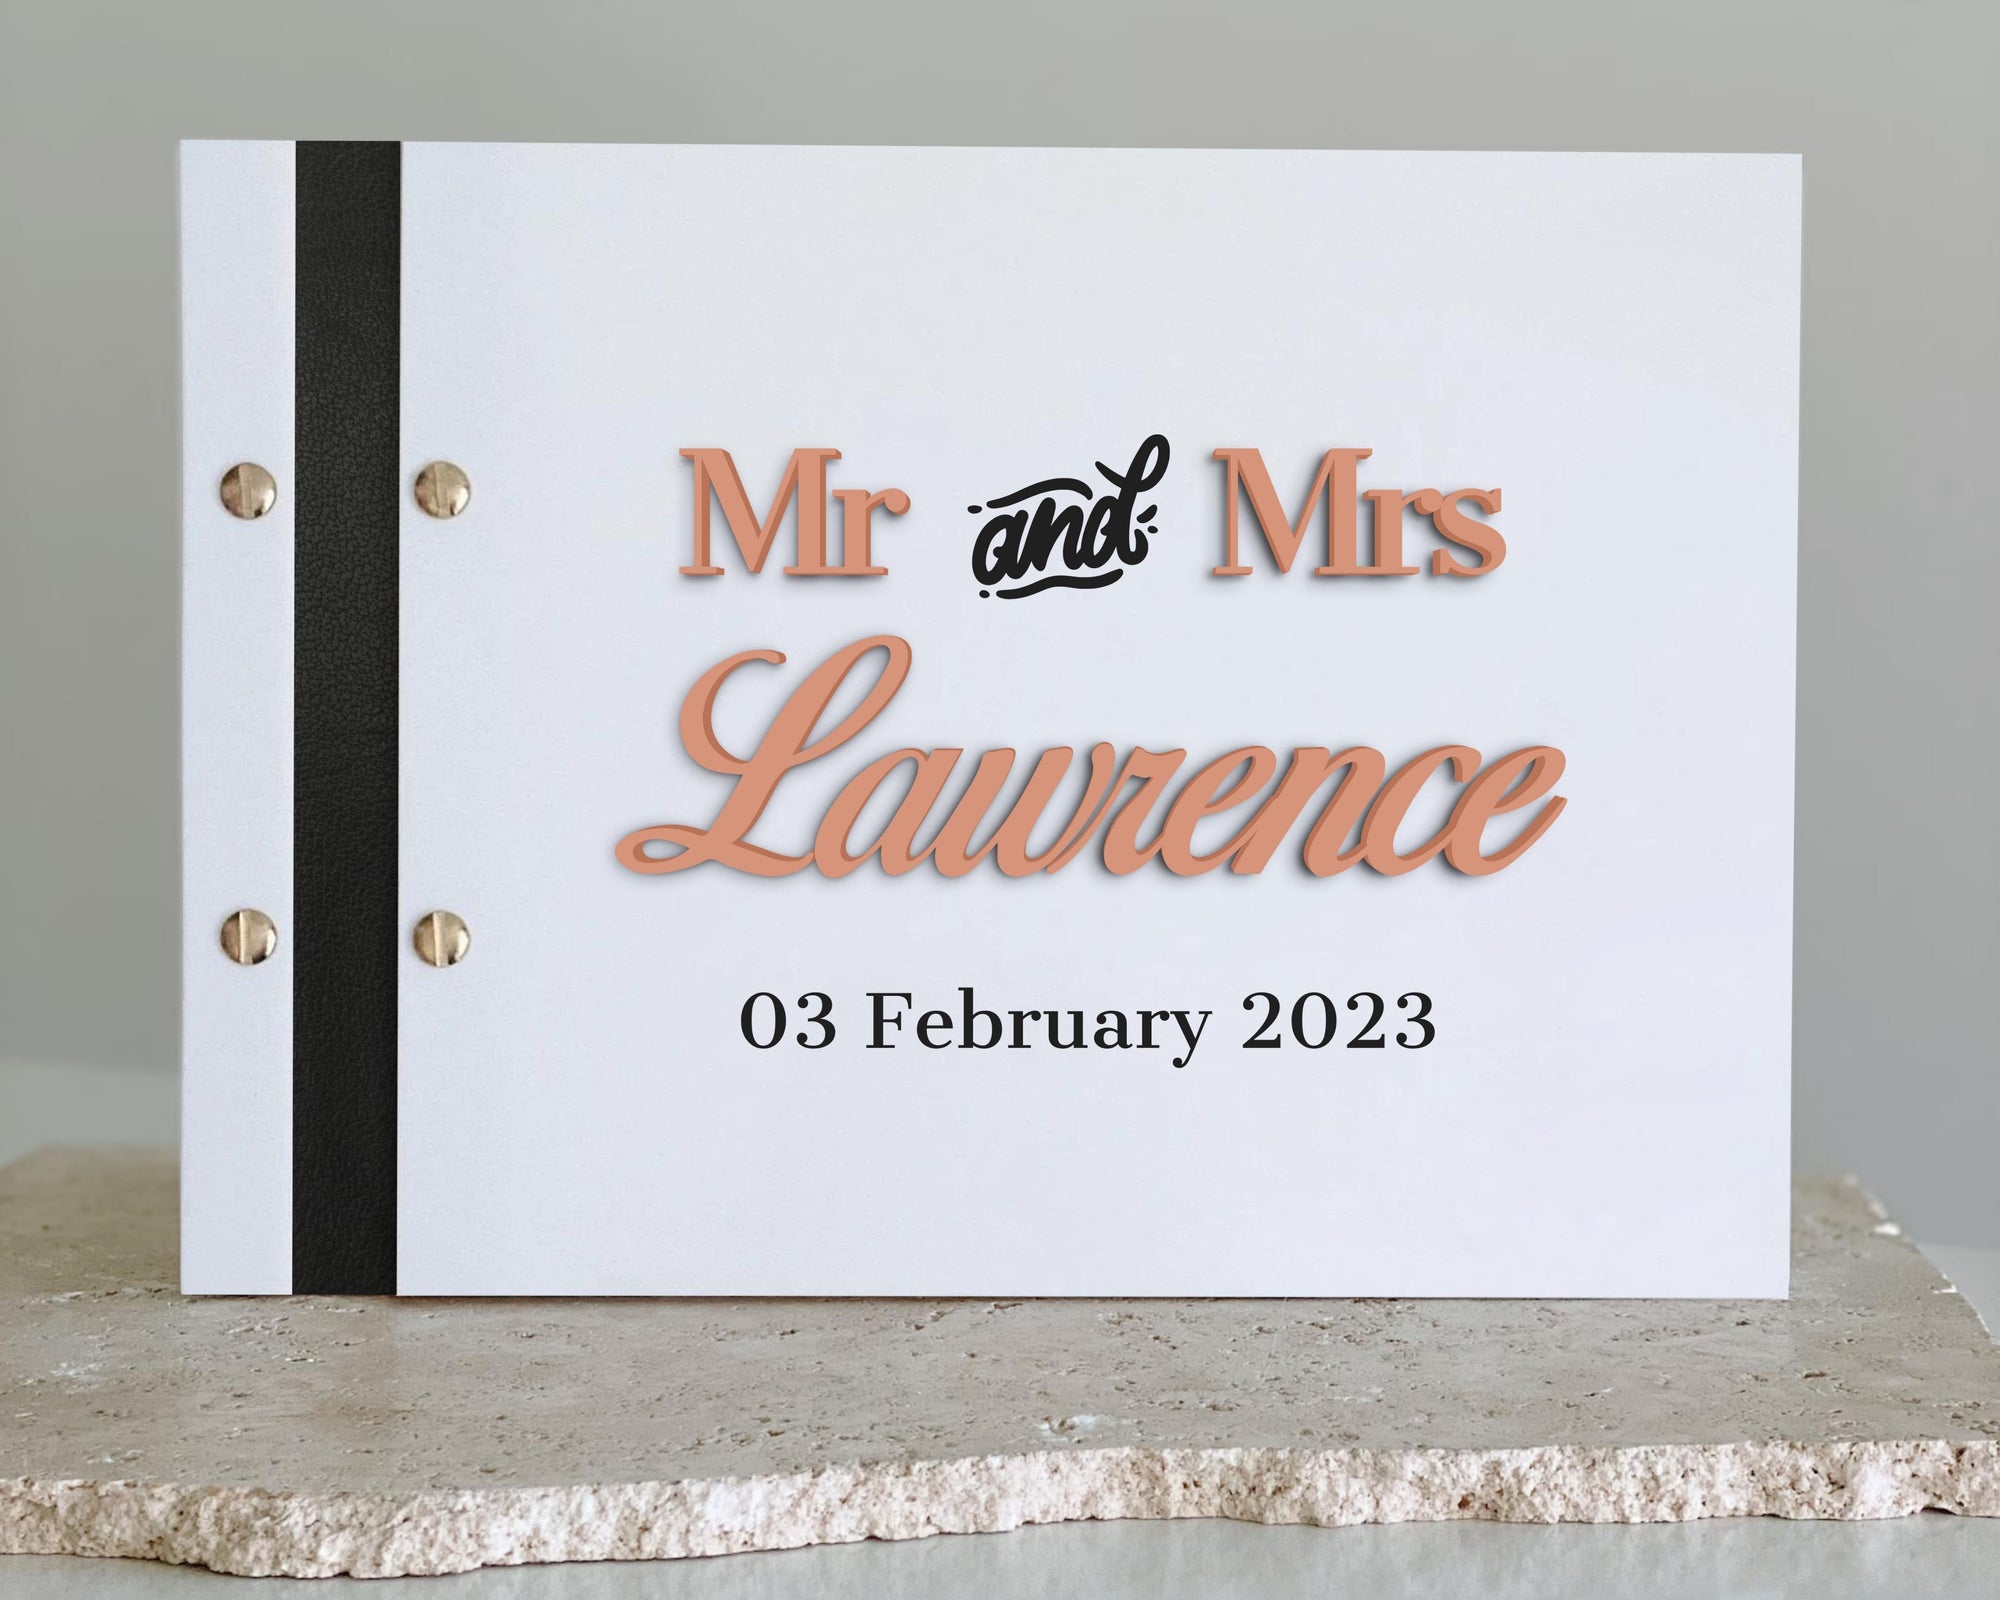 Custom Made Engraving &amp; 3D Raised Acrylic, Vegan Leather Wedding Guest Book, Personalised Traditional Logo Guestbook Keepsake, Party Decor